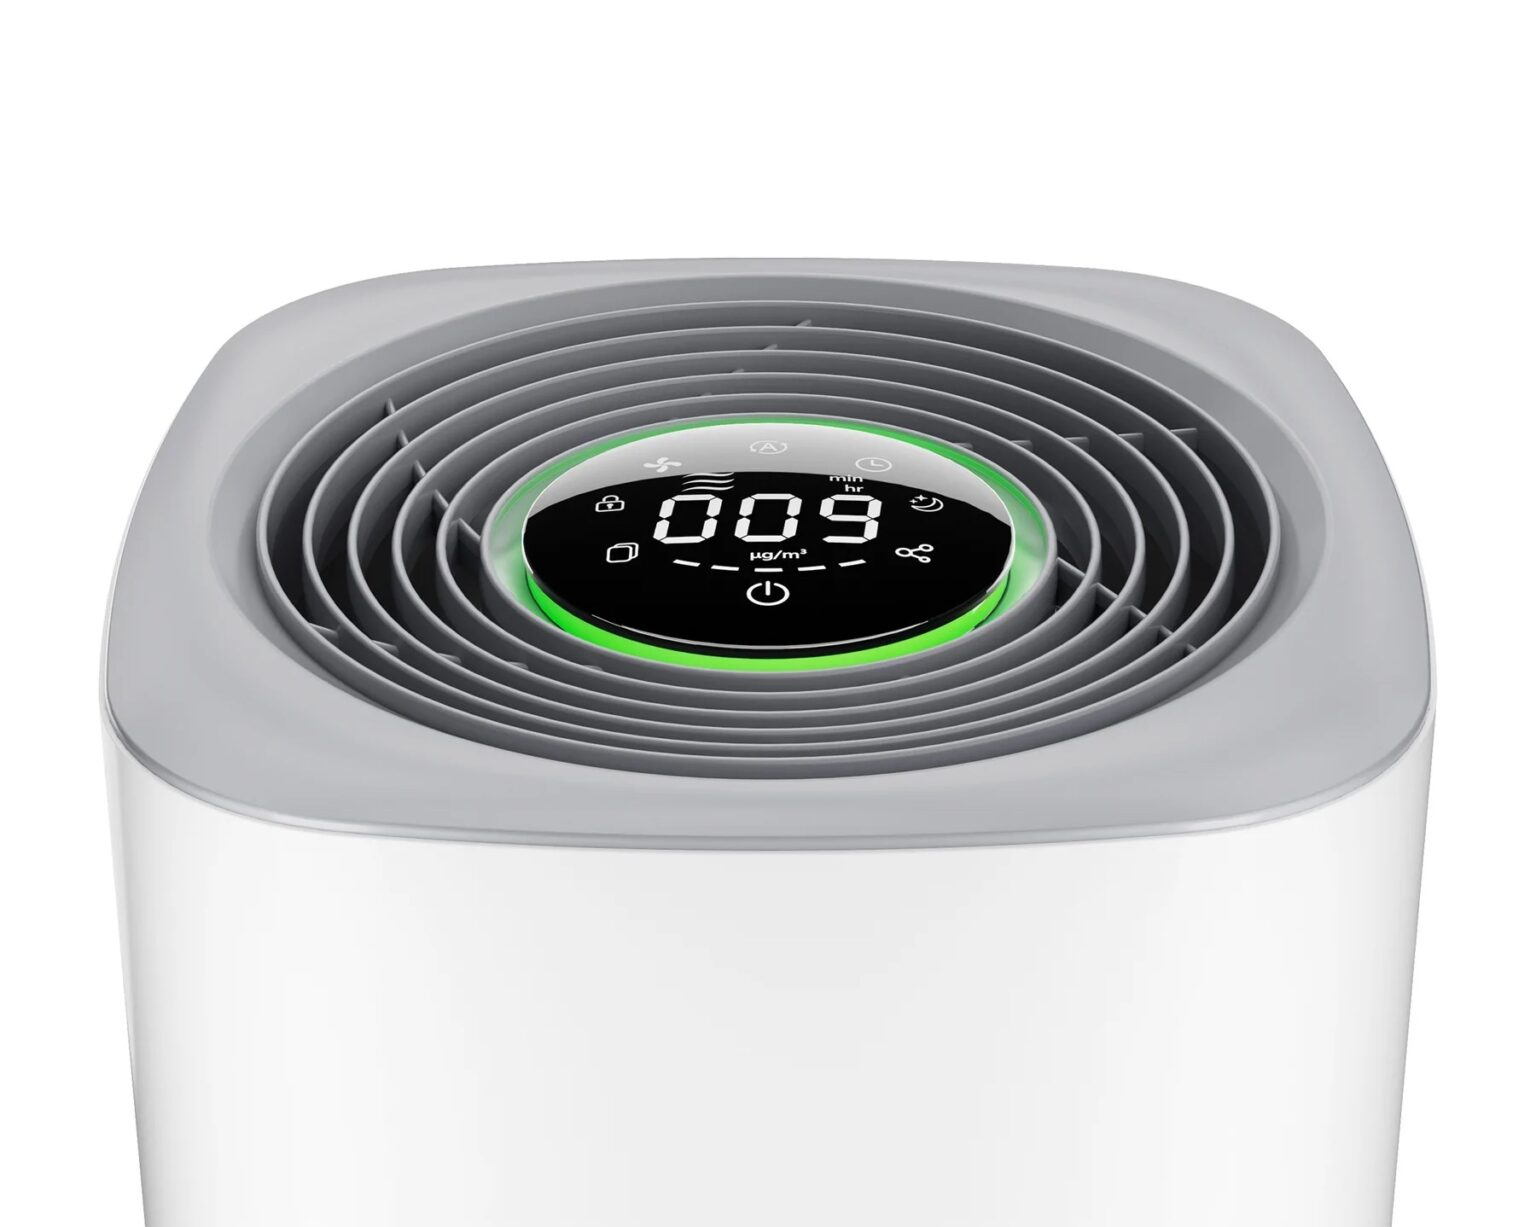 AirVersa's new Purelle air purifier works with HomeKit as well as the Thread wireless networking protocol.